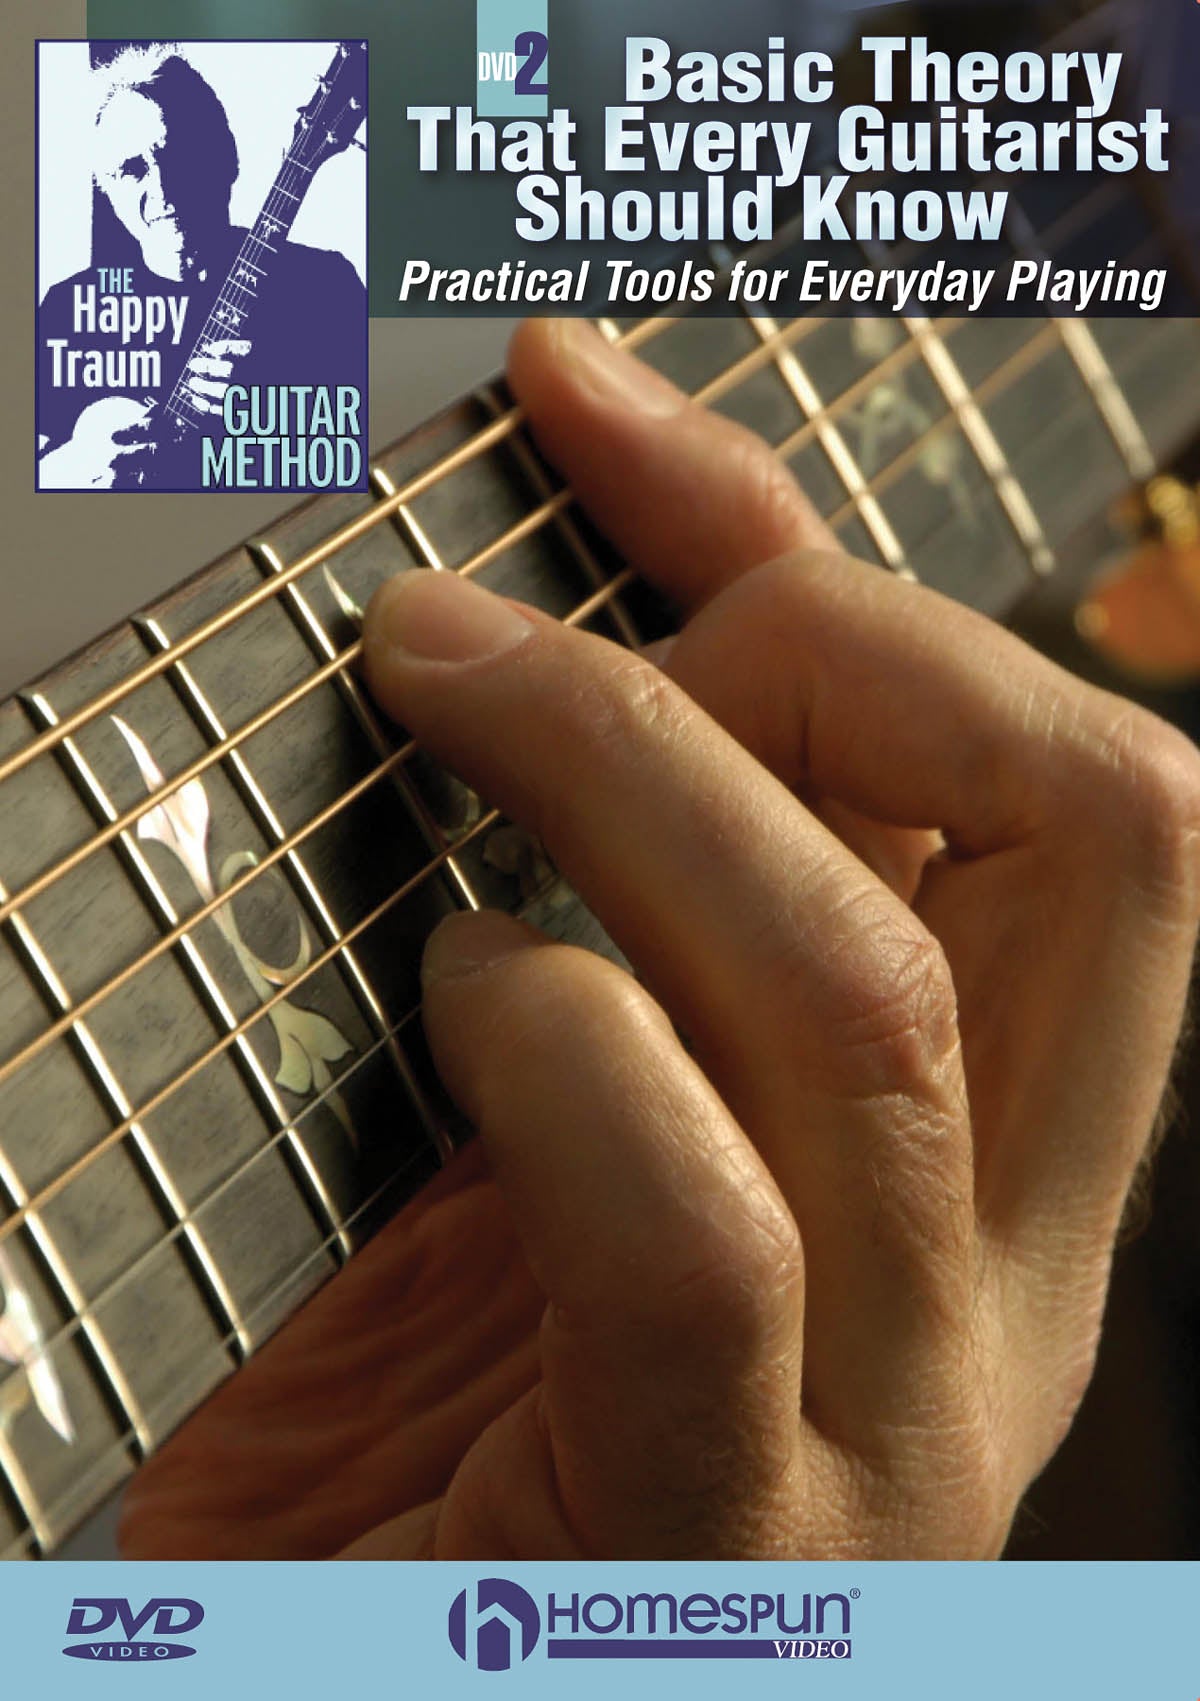 Image 1 of DVD-The Happy Traum Guitar Method: Basic Theory That Every Guitarist Should Know - Vol. 2 - SKU# 300-DVD376 : Product Type Media : Elderly Instruments